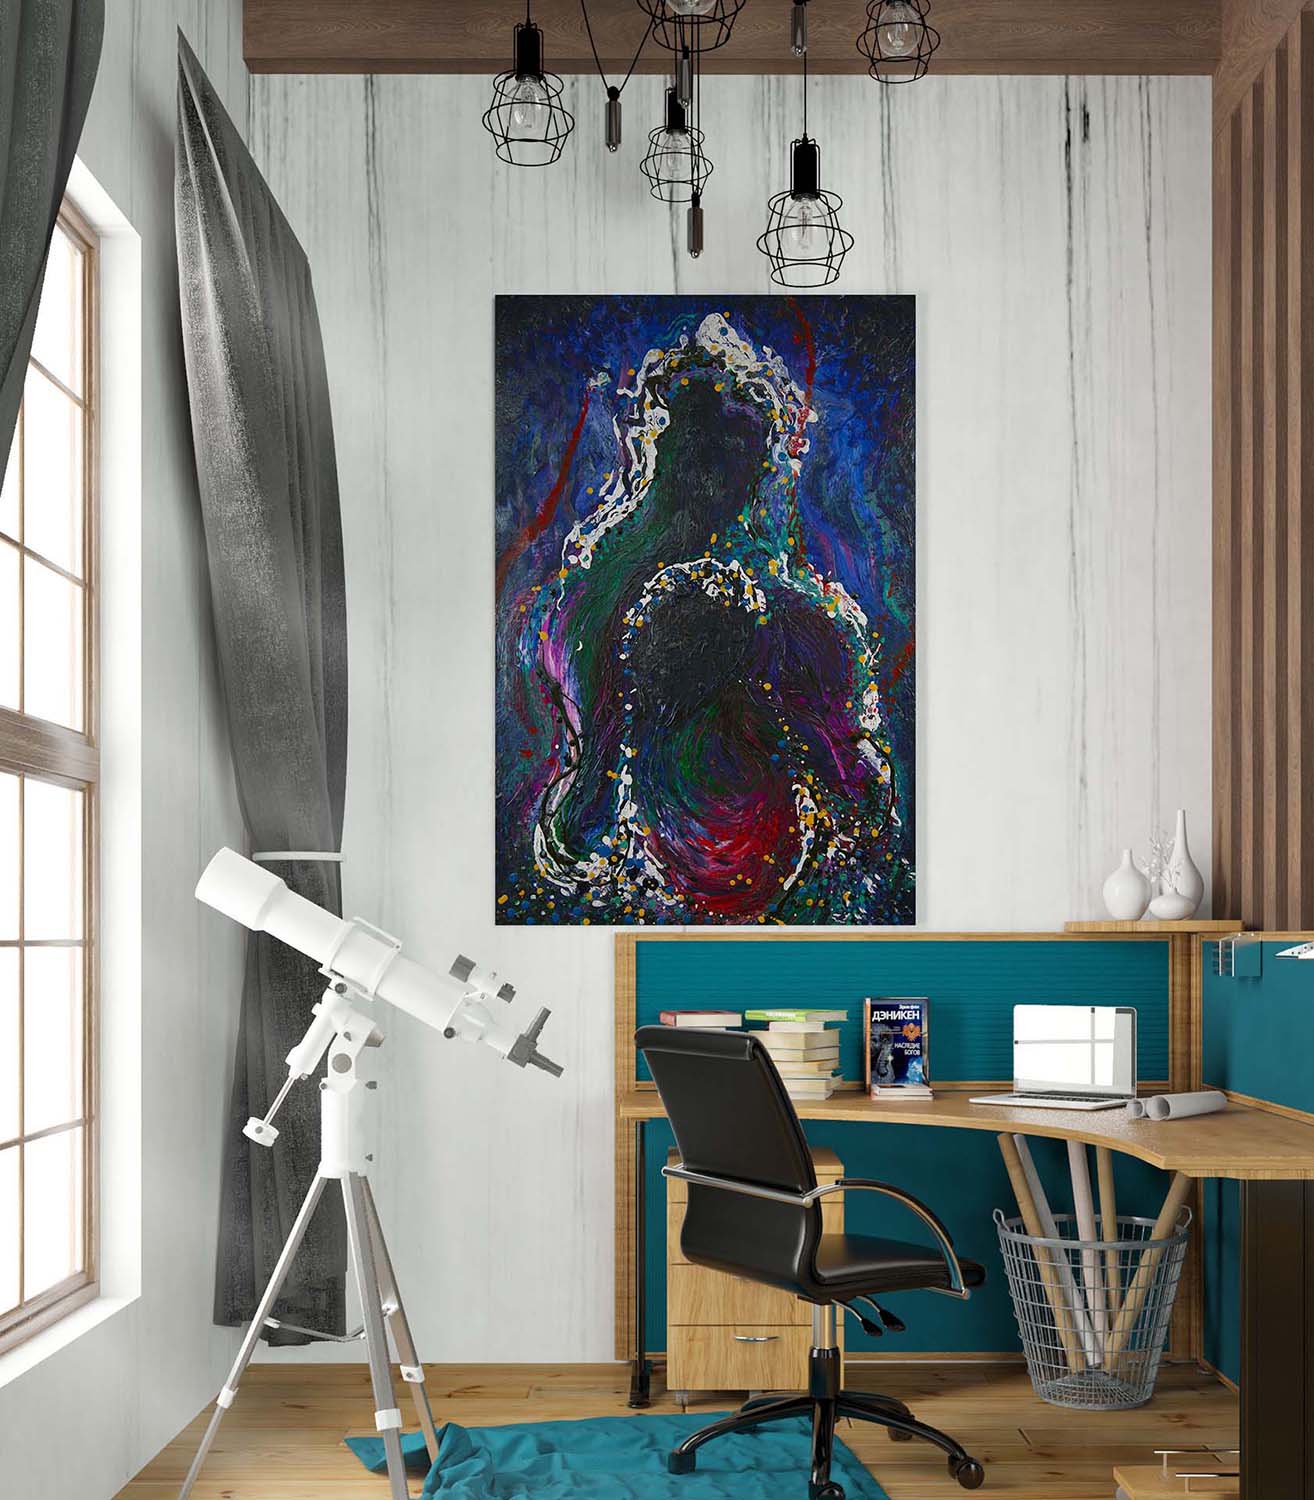 Large wall print of Auras Embraced original acrylic painting on canvas by Doug LaRue next to a telescope by a window